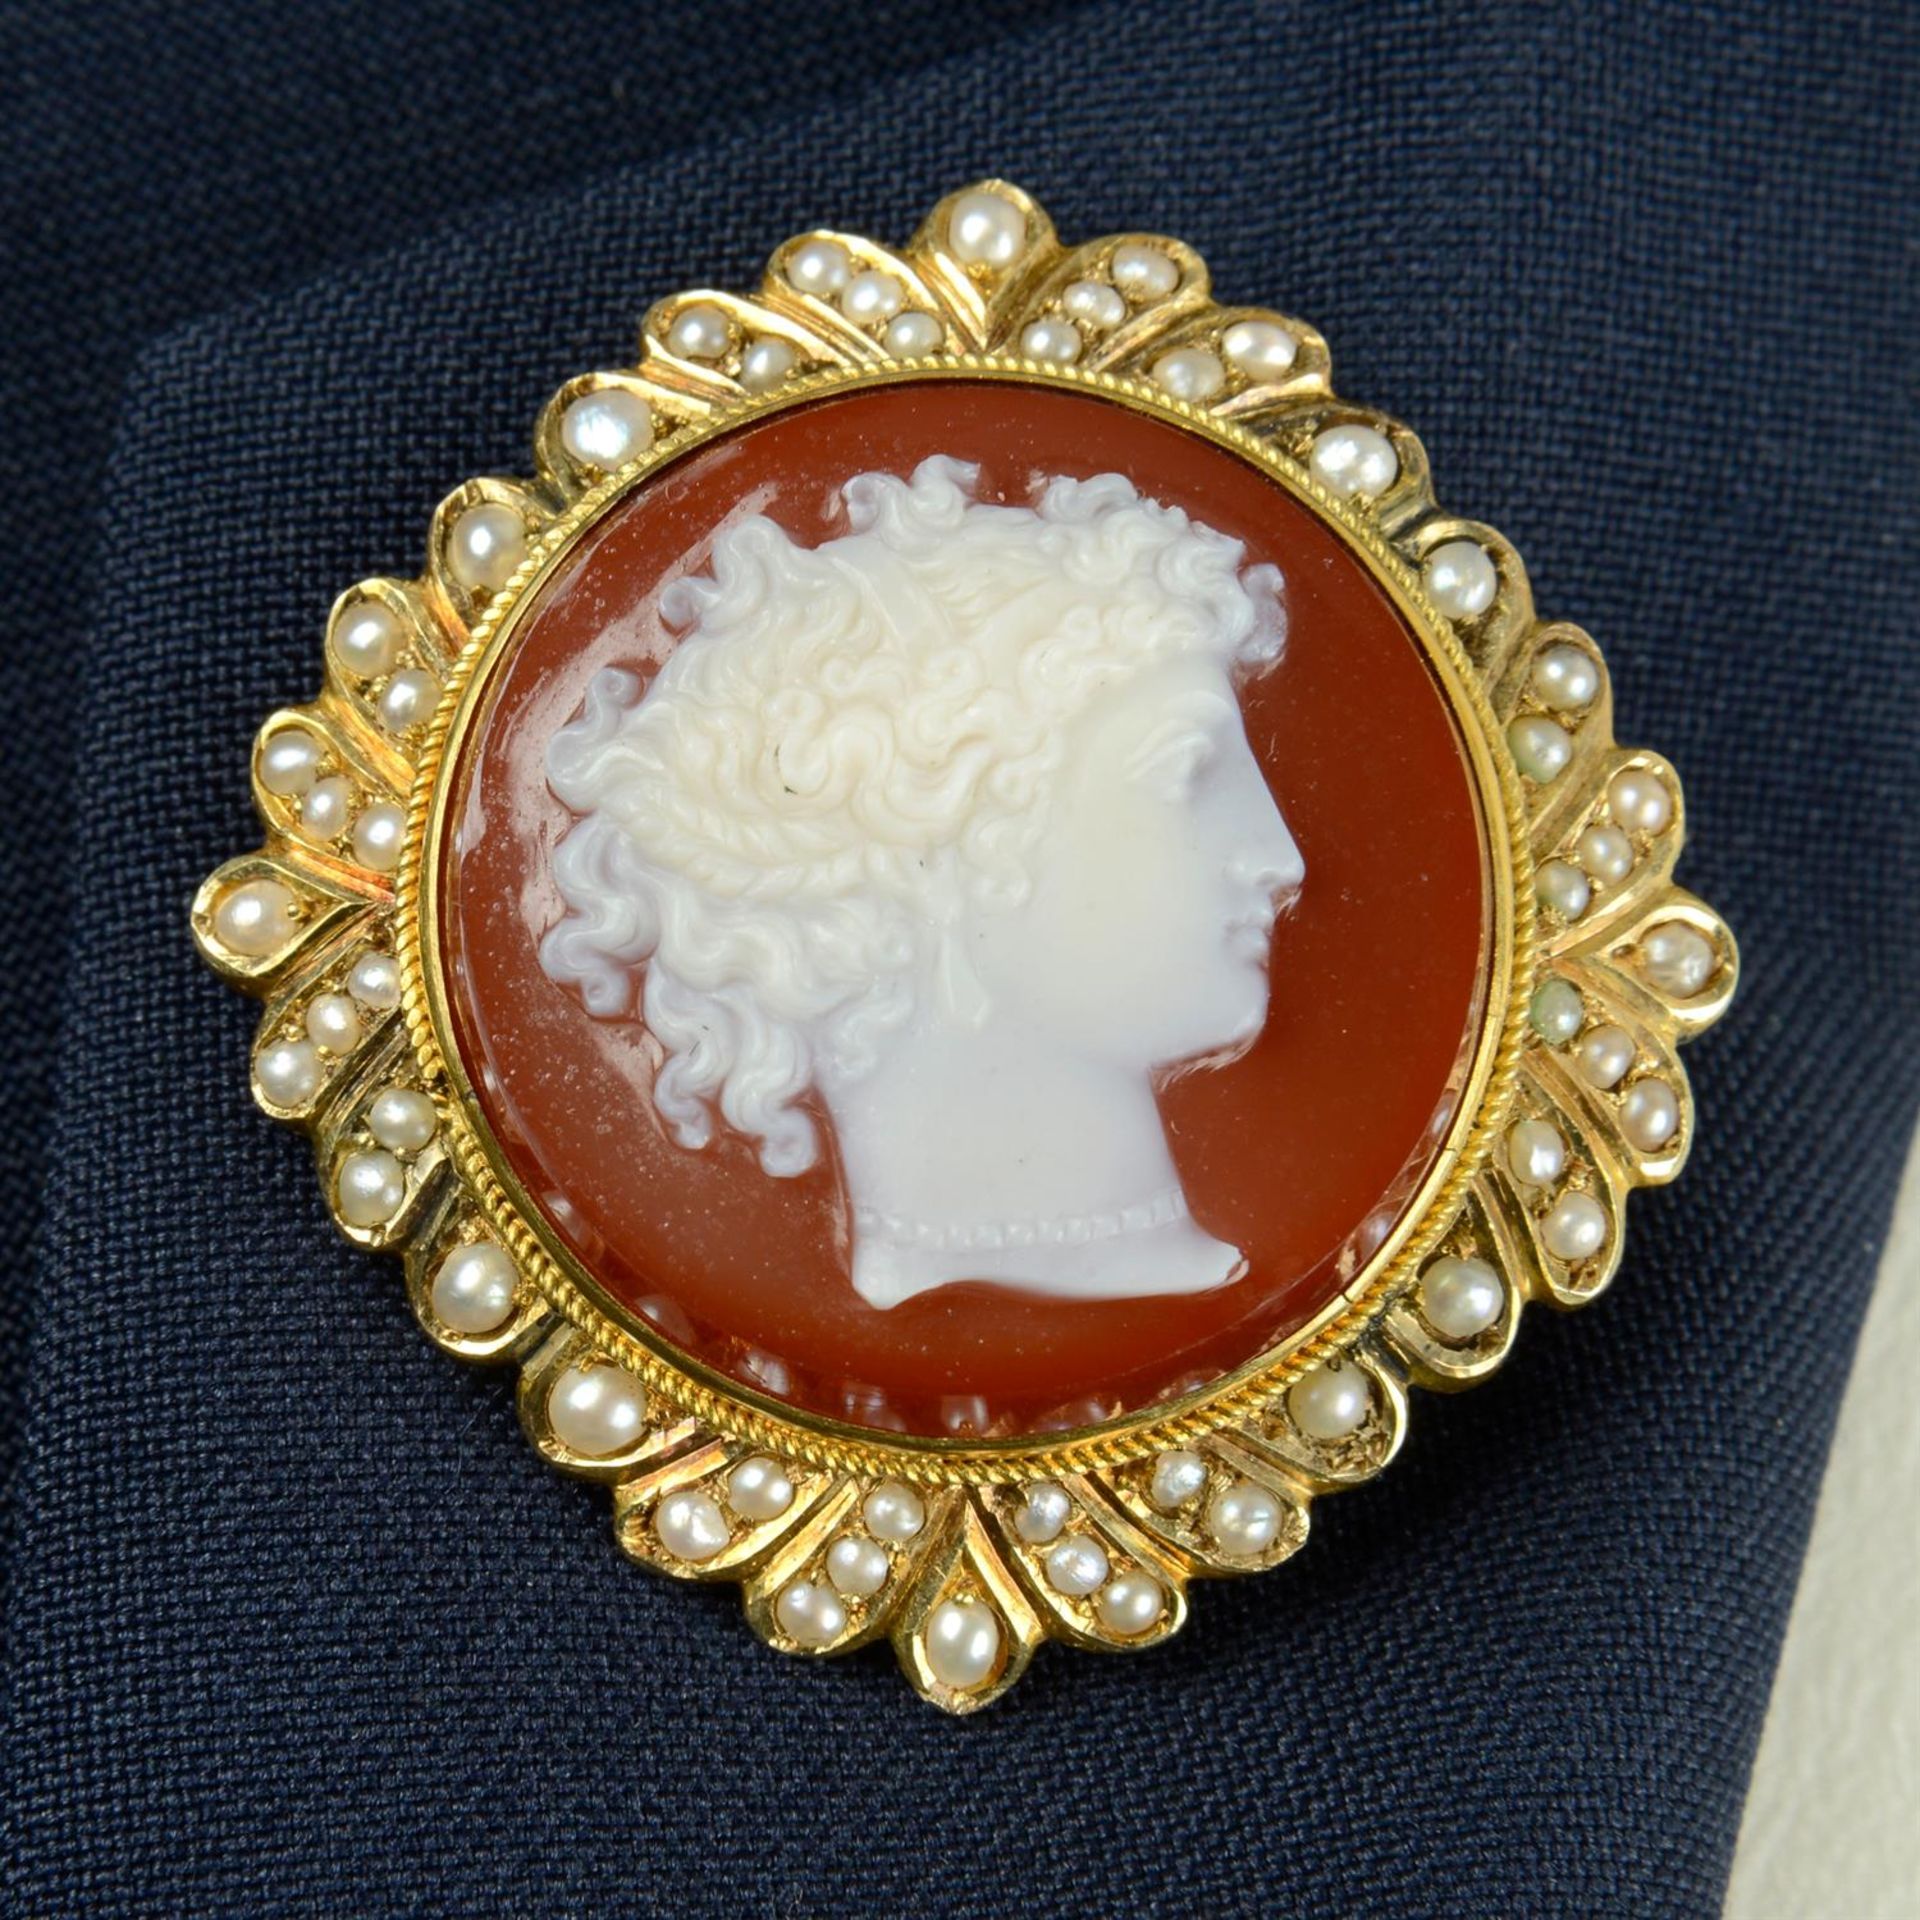 A late 19th century sardonyx cameo brooch, with split pearl surround.